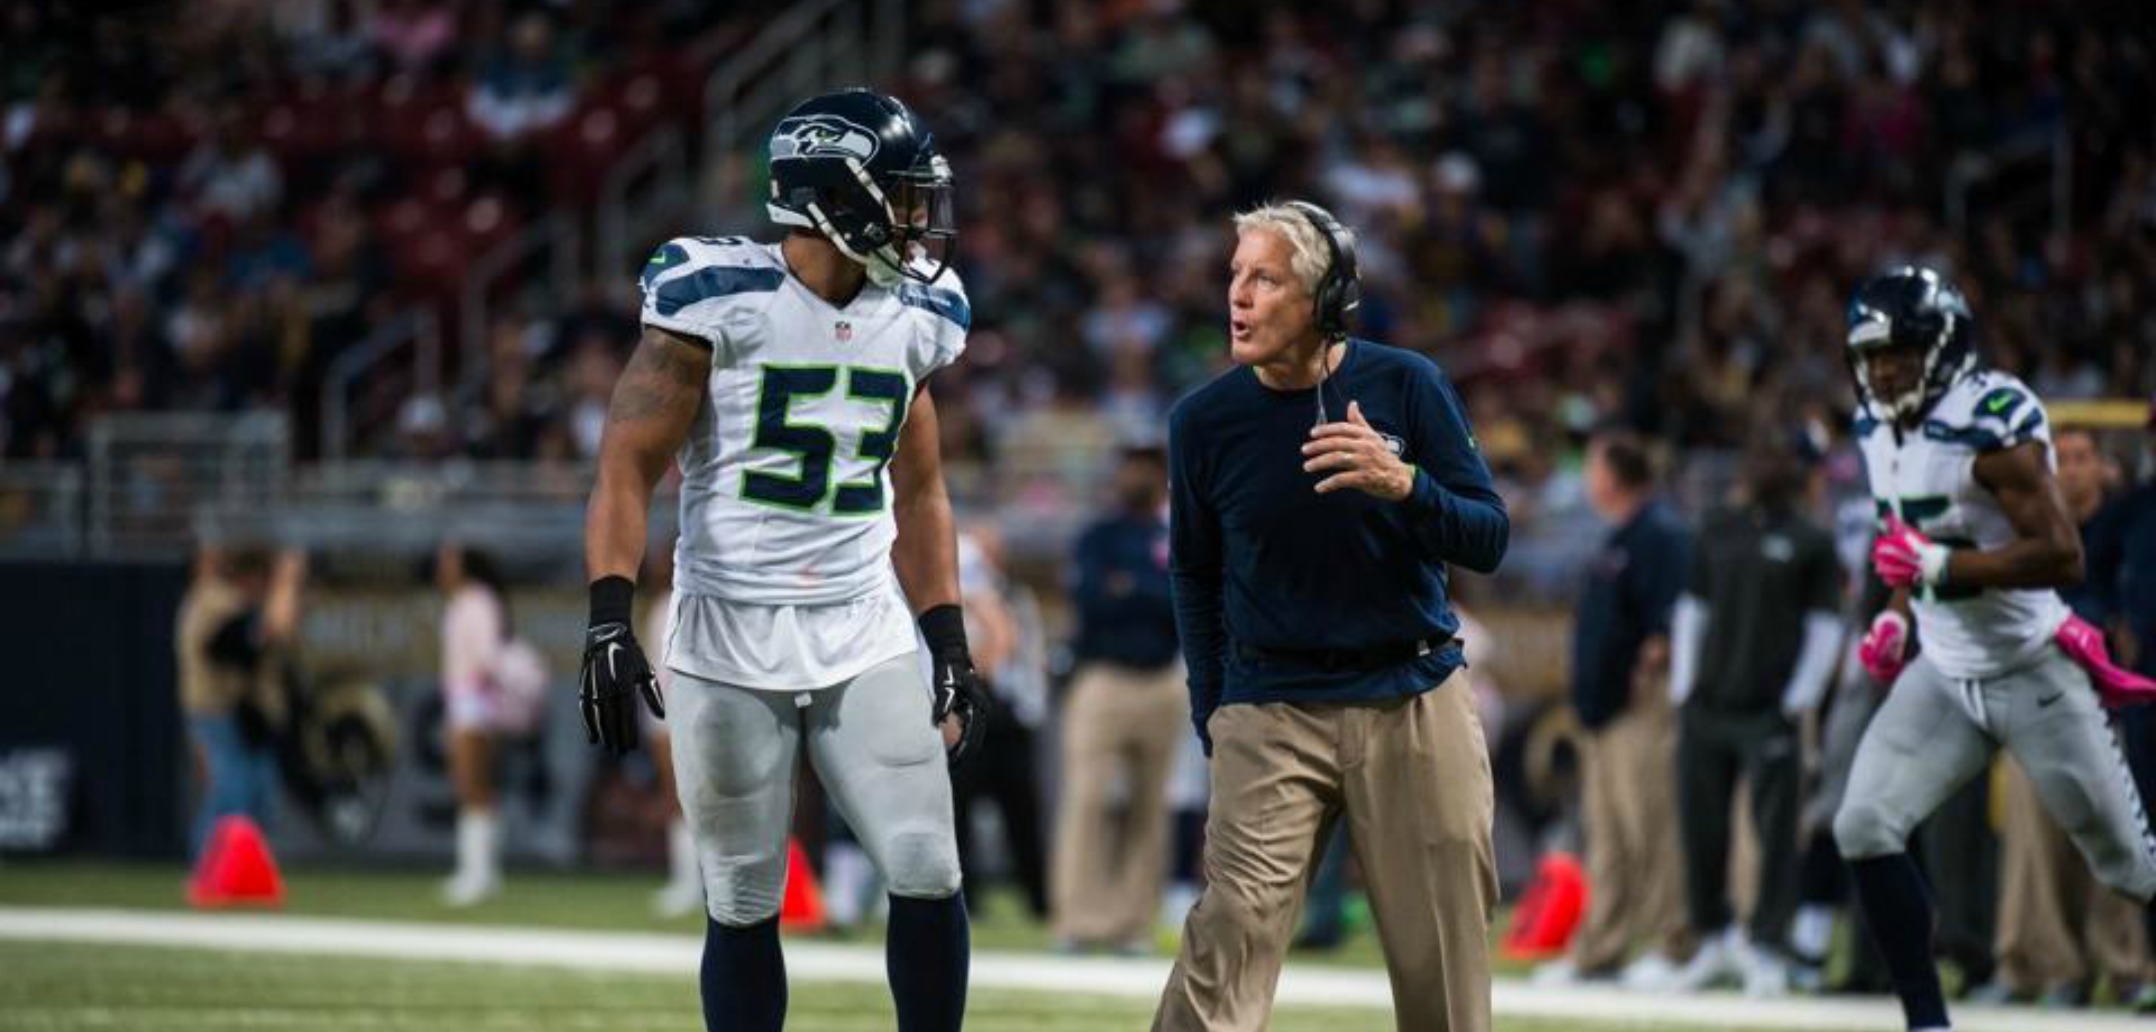 Courtesy of Seahawks.com: Carroll and Co. need to right the ship immediately. 